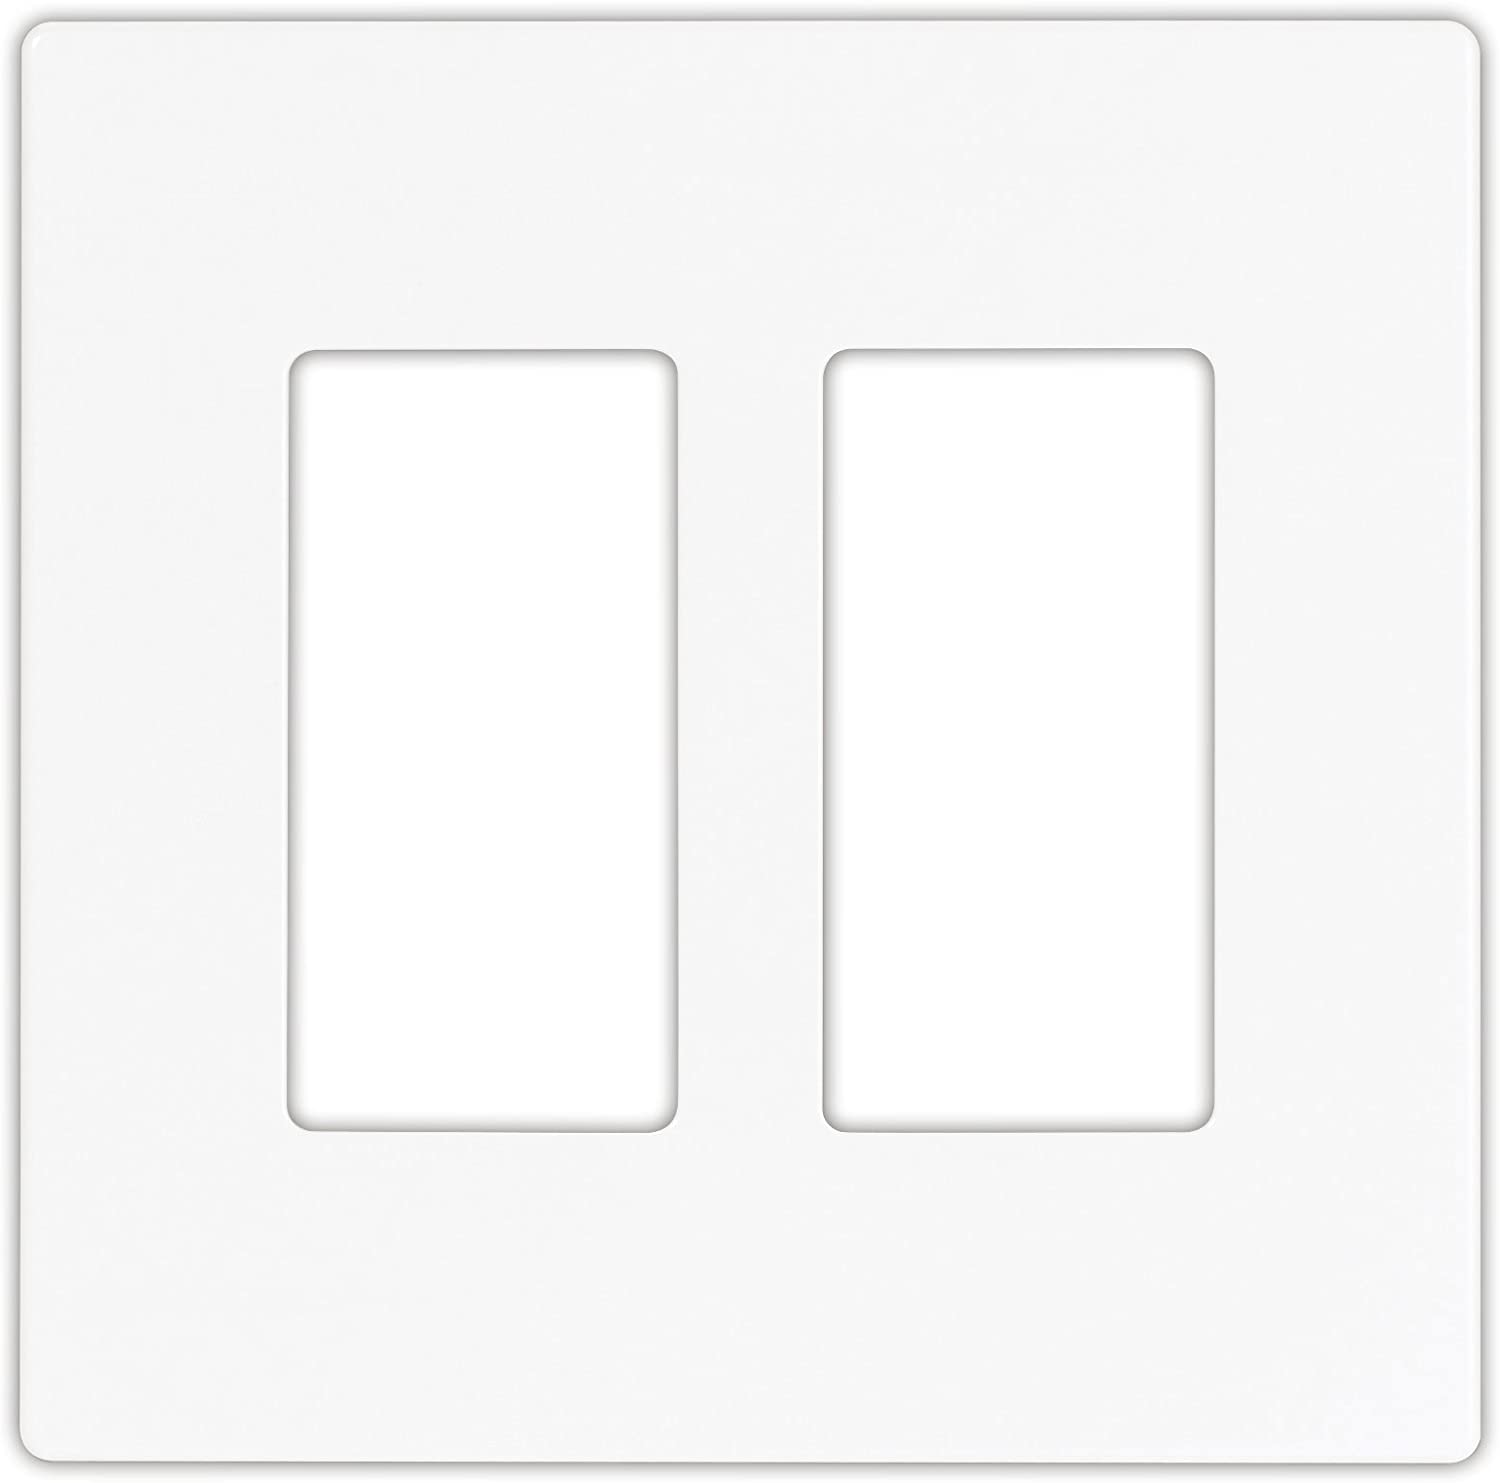 EATON 9522WS Aspire 9522 Decorative Mid Size Screw Less Wall Plate, 2 Gang 4-1/2 in L X 4.56 in W 0.08 in T, Satin, White